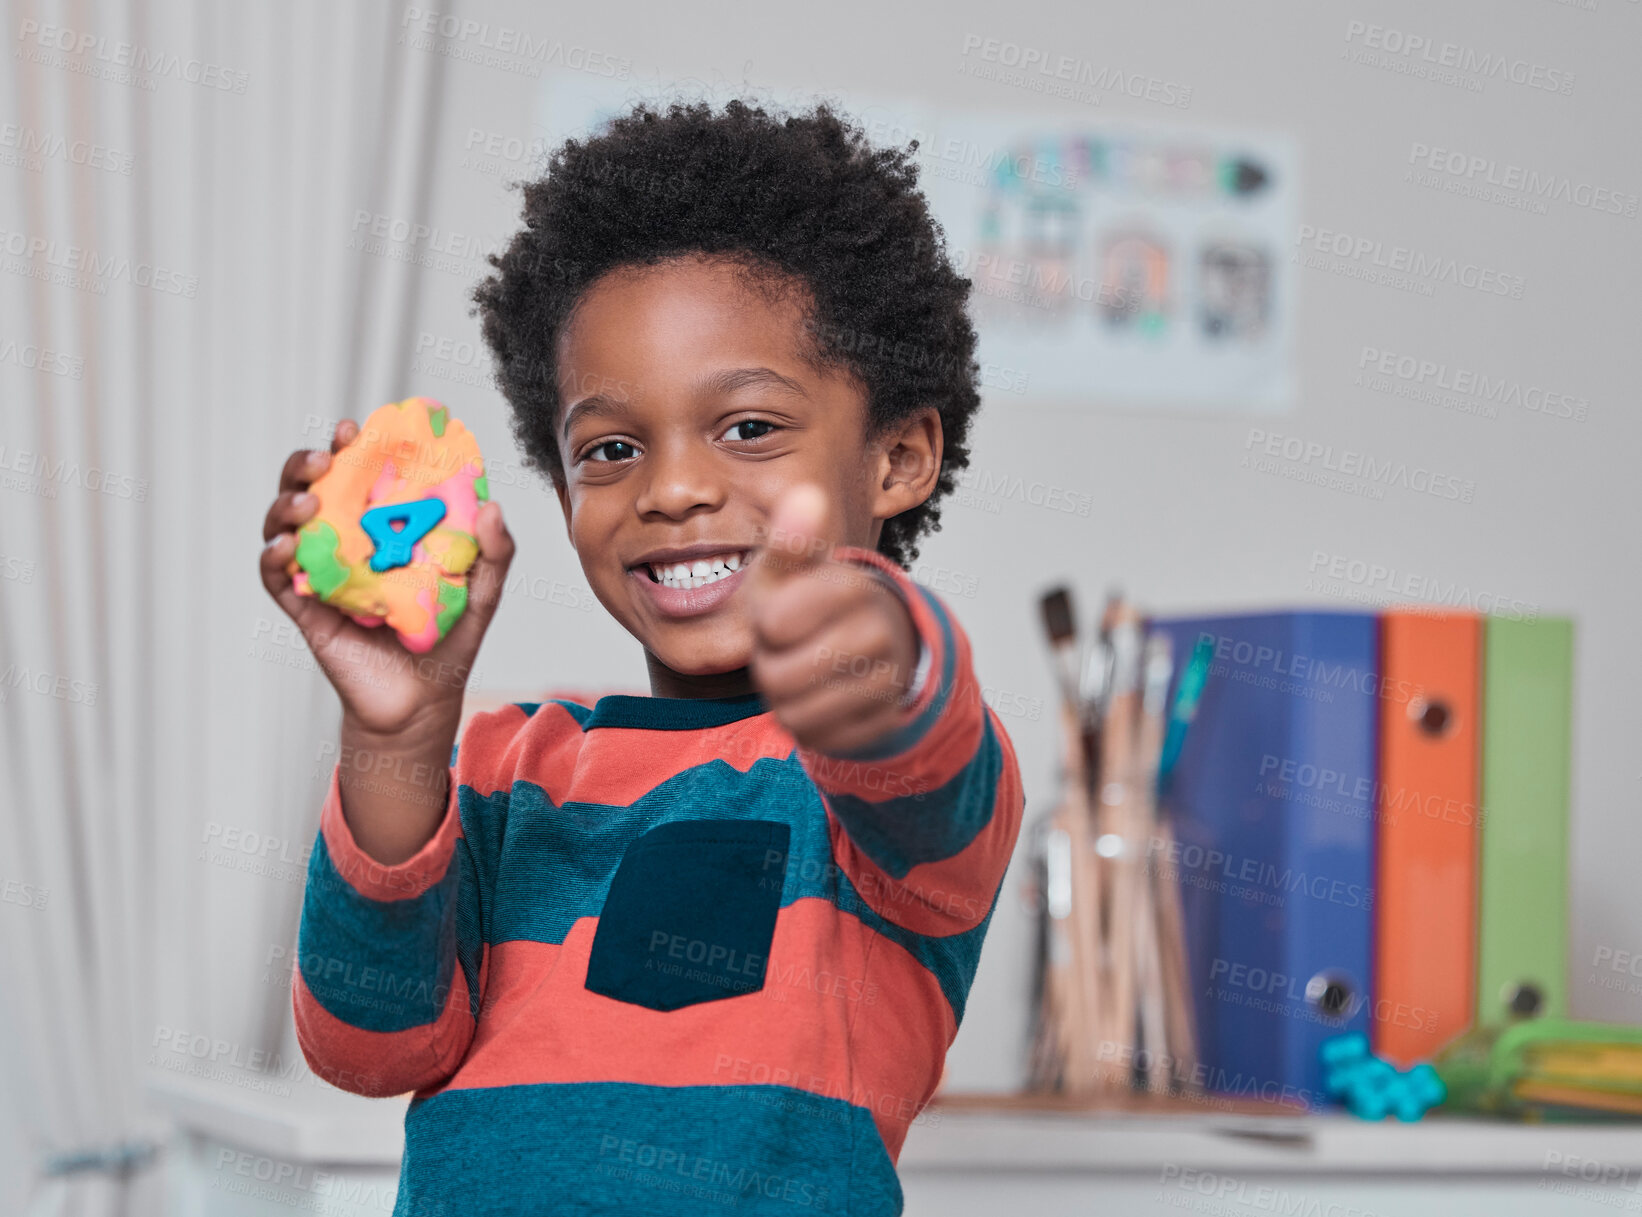 Buy stock photo Shot of a young boy showing thumbs up while holding play dough